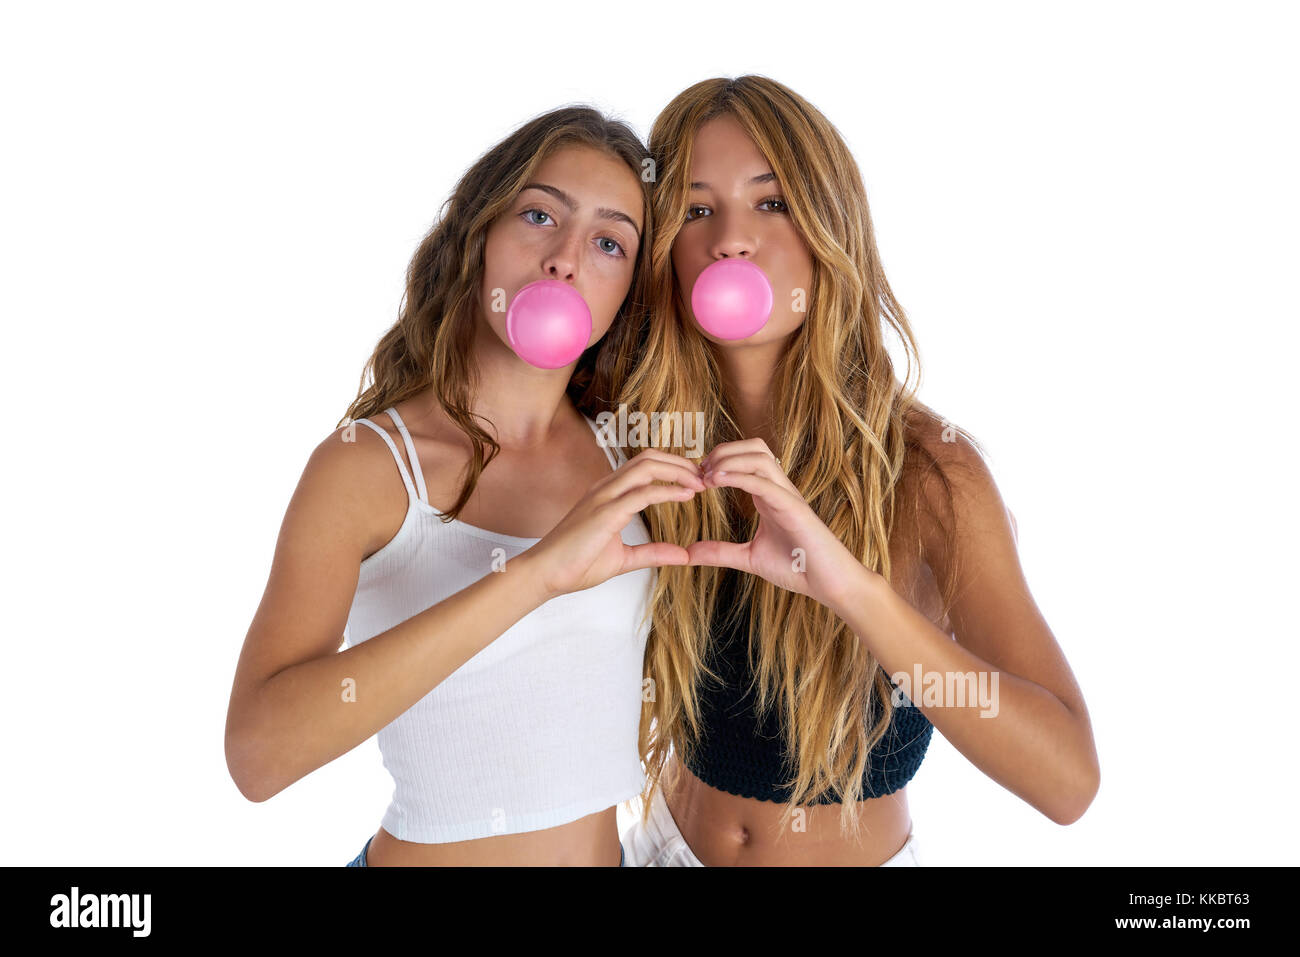 Best friends teen girls with bubble gum and heart fingers shape gesture Stock Photo